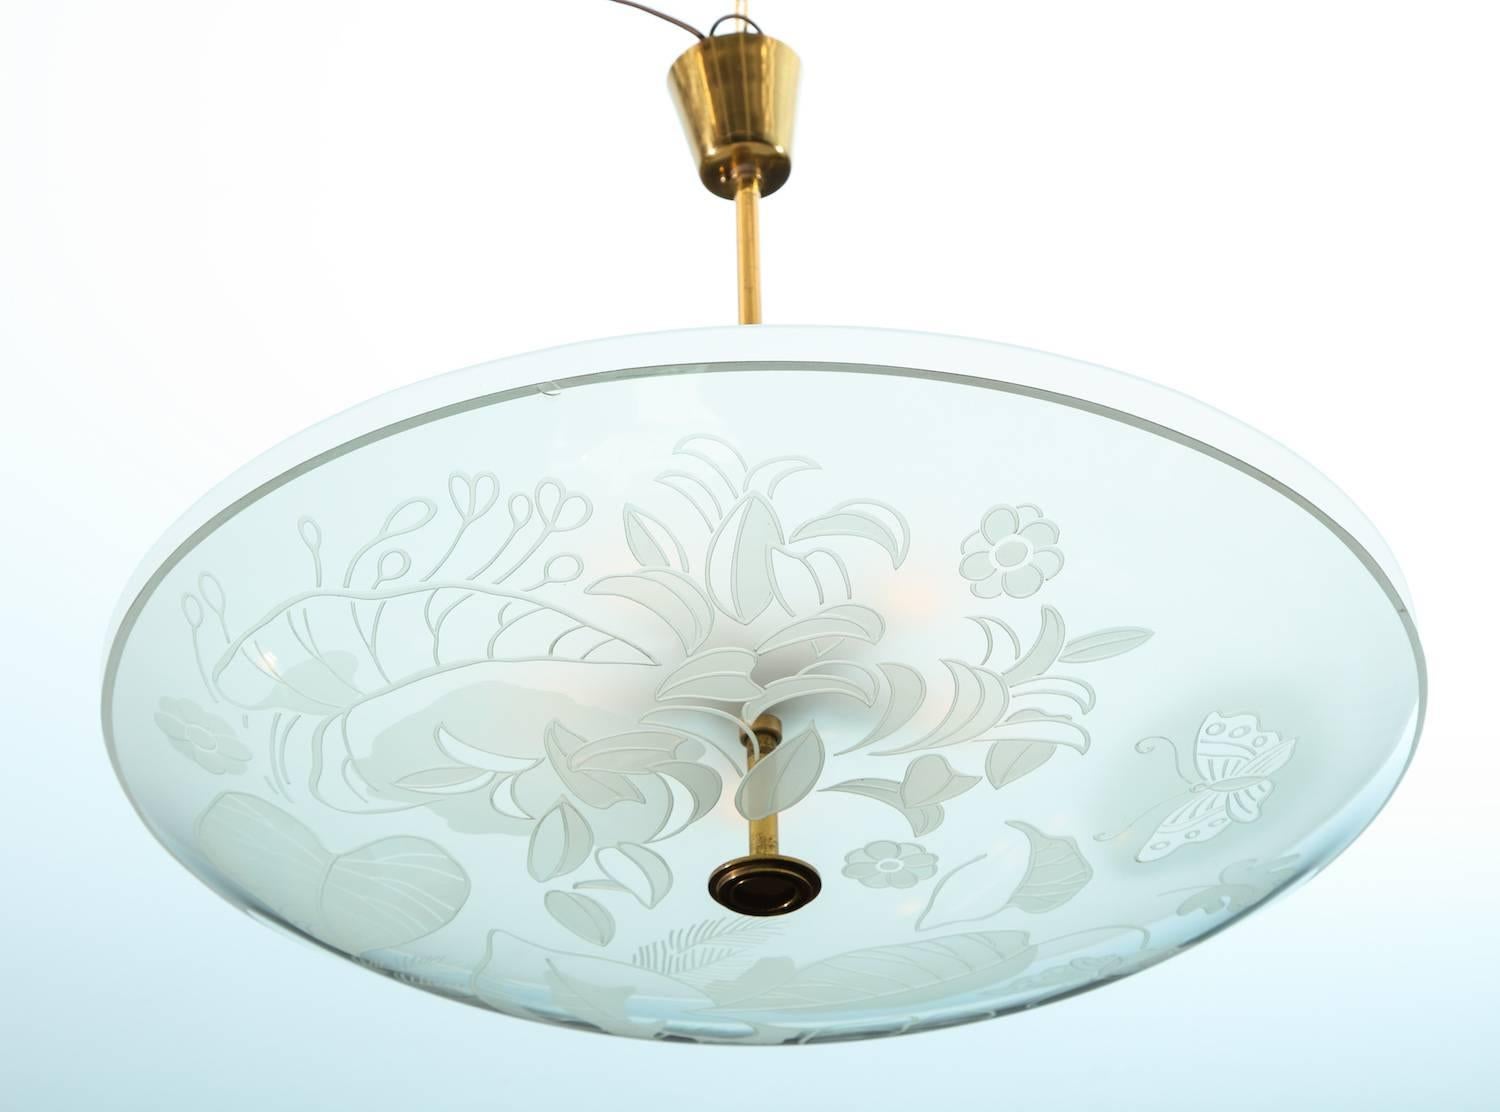 Etched glass ceiling fixture by Pietro Chiesa for Fontana Arte.
Early hanging light with 5 standard sockets. Beautiful etched glass dish incised with foliage and butterflies (decorazione G), from an early Fontana Arte catalog. Centre brass rod,